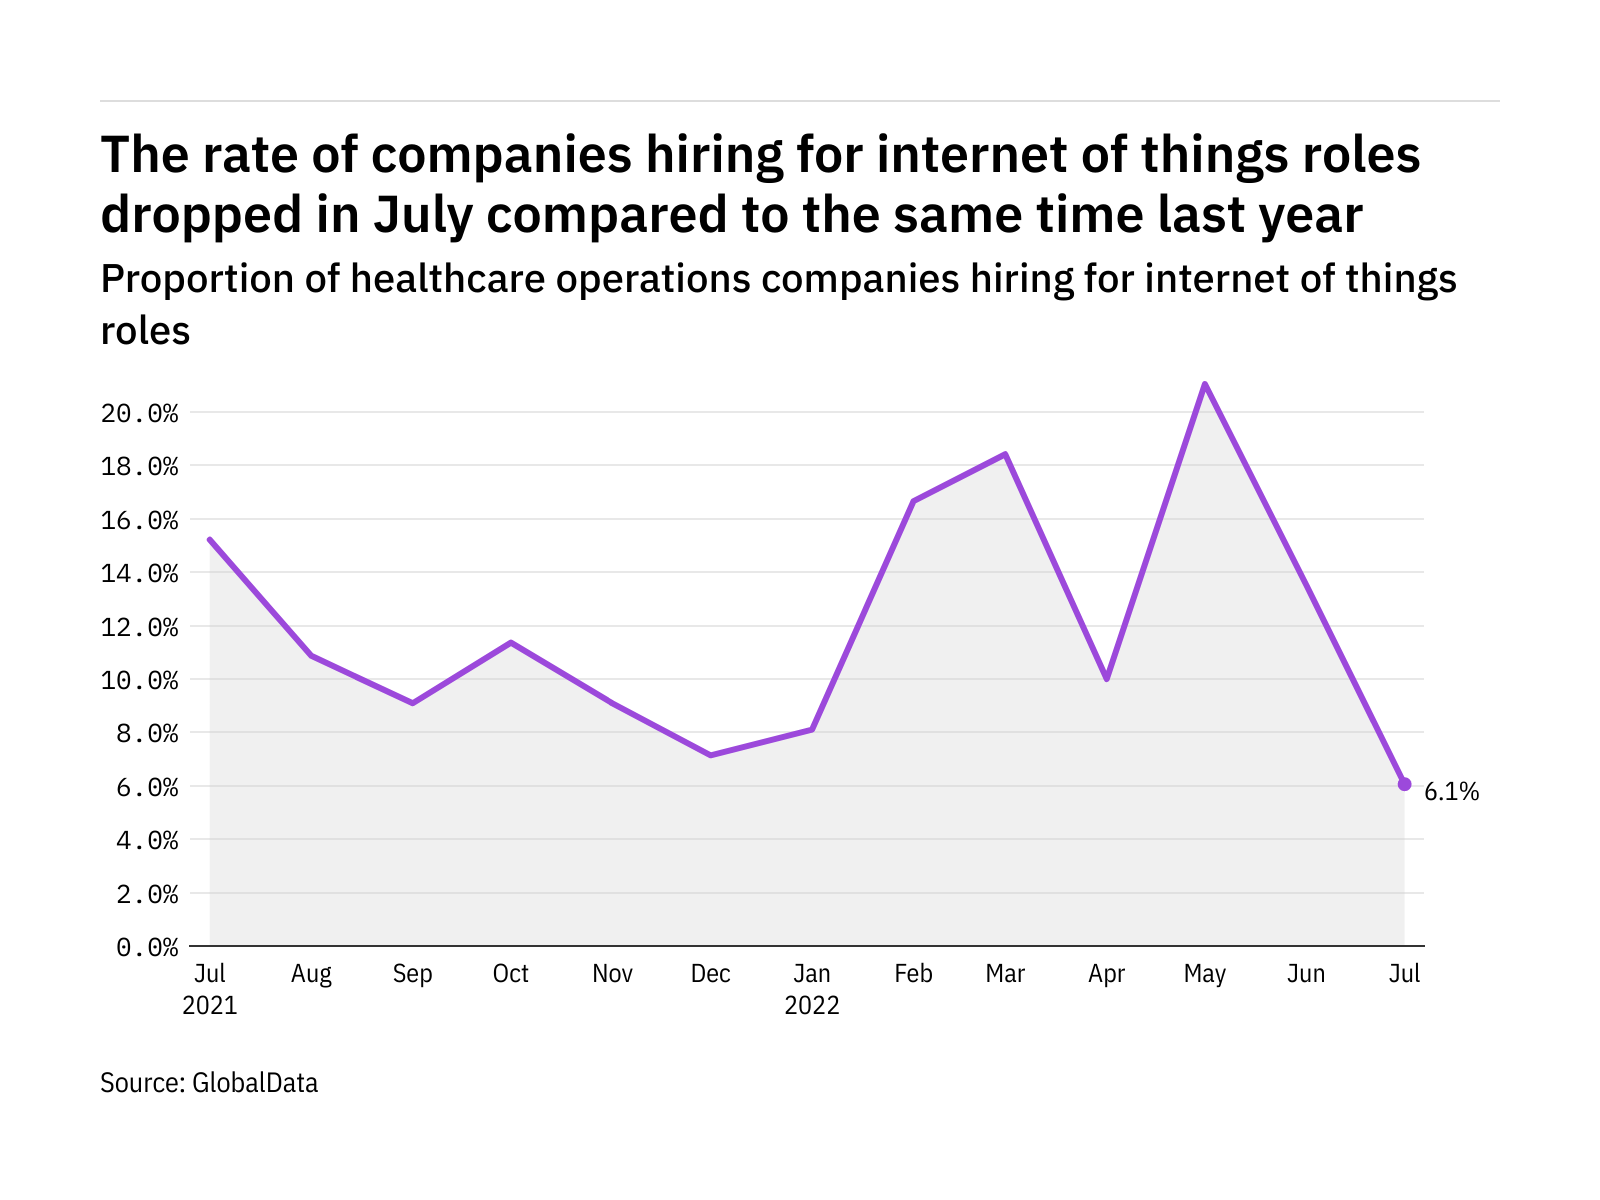 Internet of things hiring levels in the healthcare industry fell to a year-low in July 2022